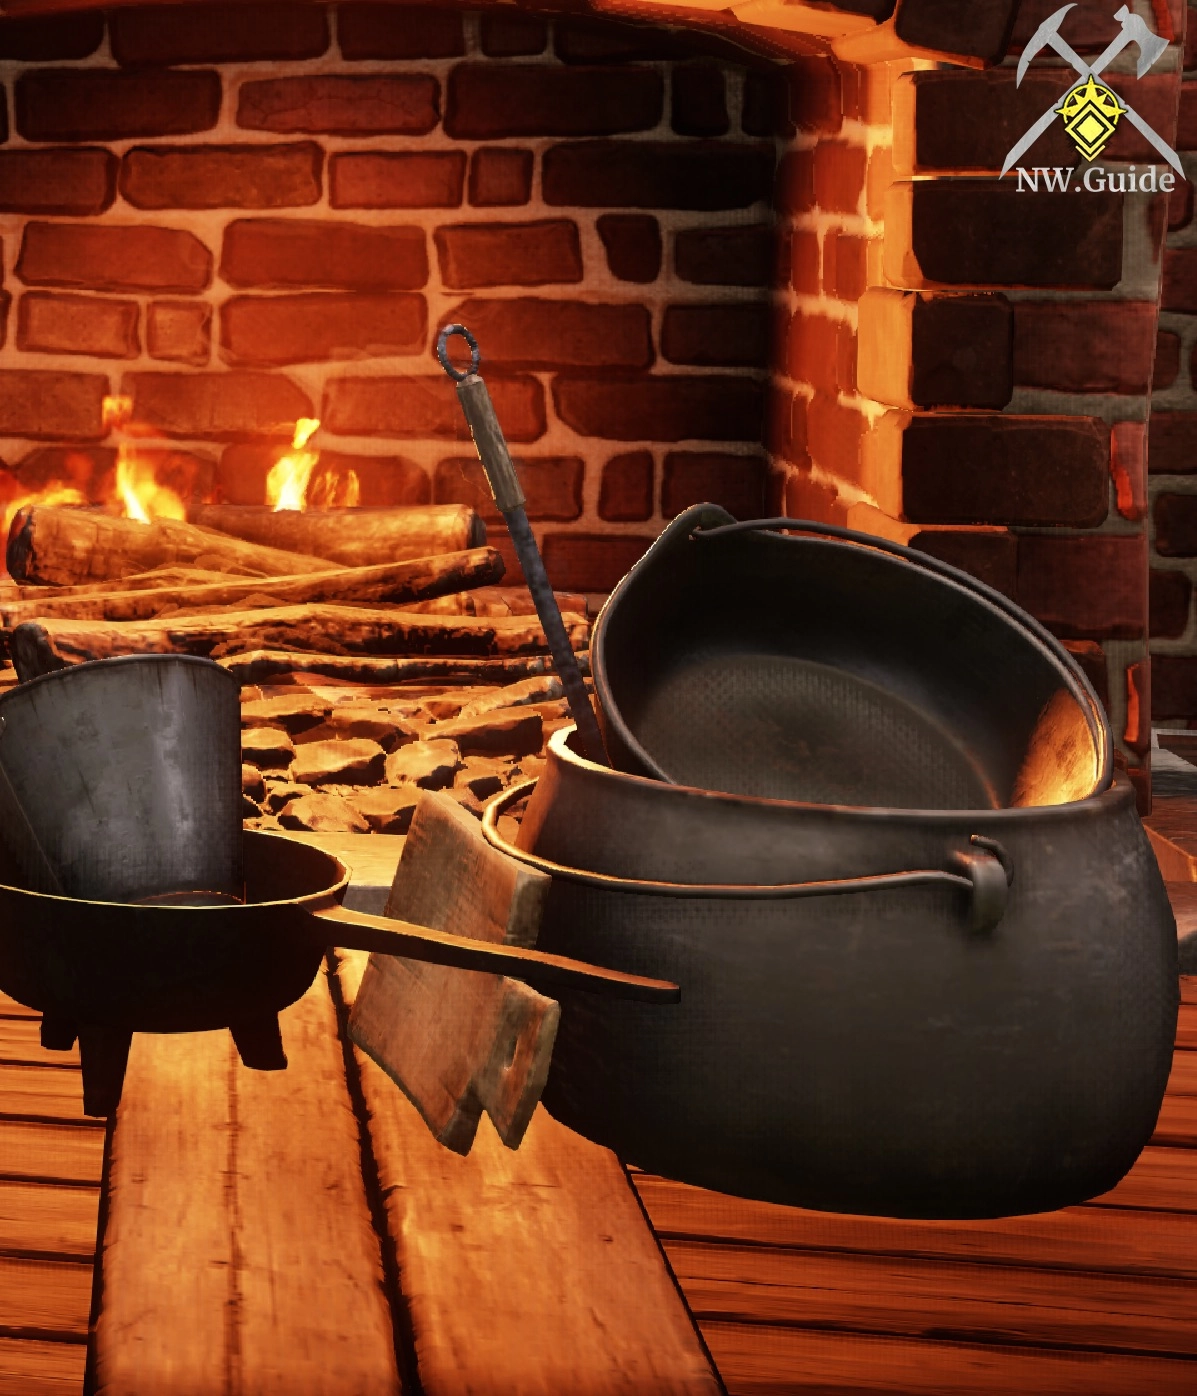 Cauldron Cooking Set on wooden floor in front of fireplace